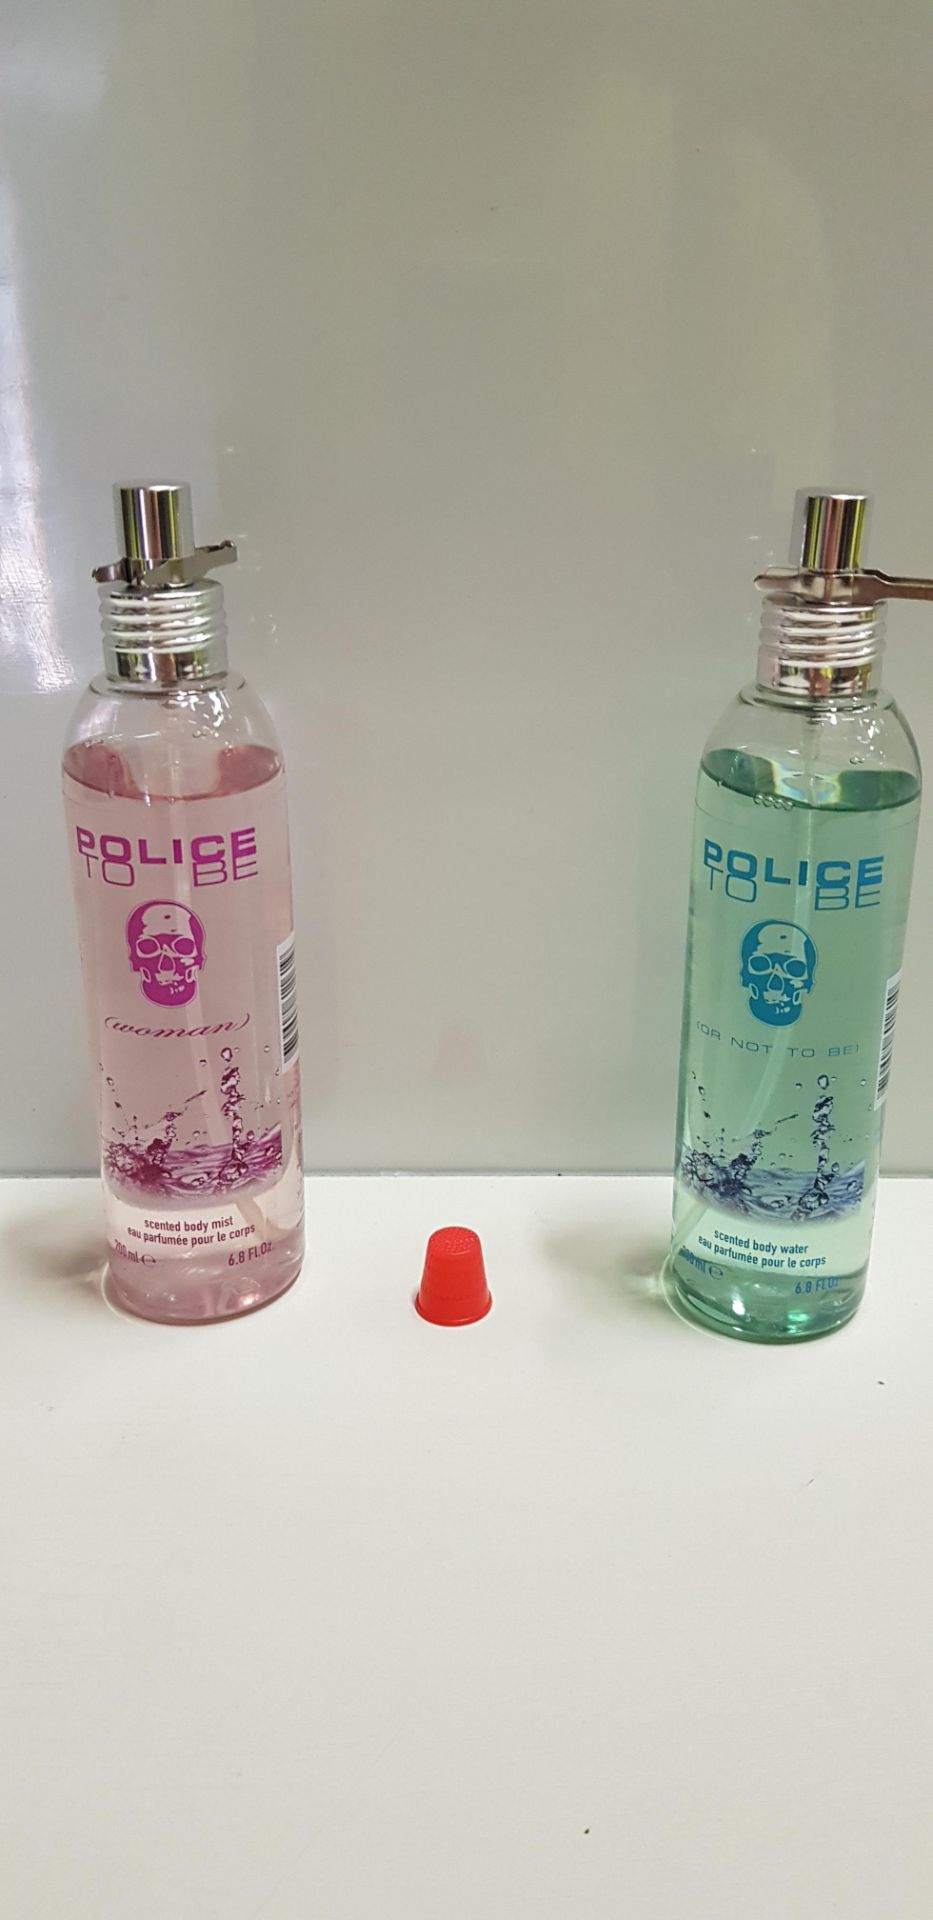 50 PIECE MIXED LOT CONTAINING POLICE TO BE SCENTED BODY MIST FOR WOMEN AND POLICE 2 BE SCENTED